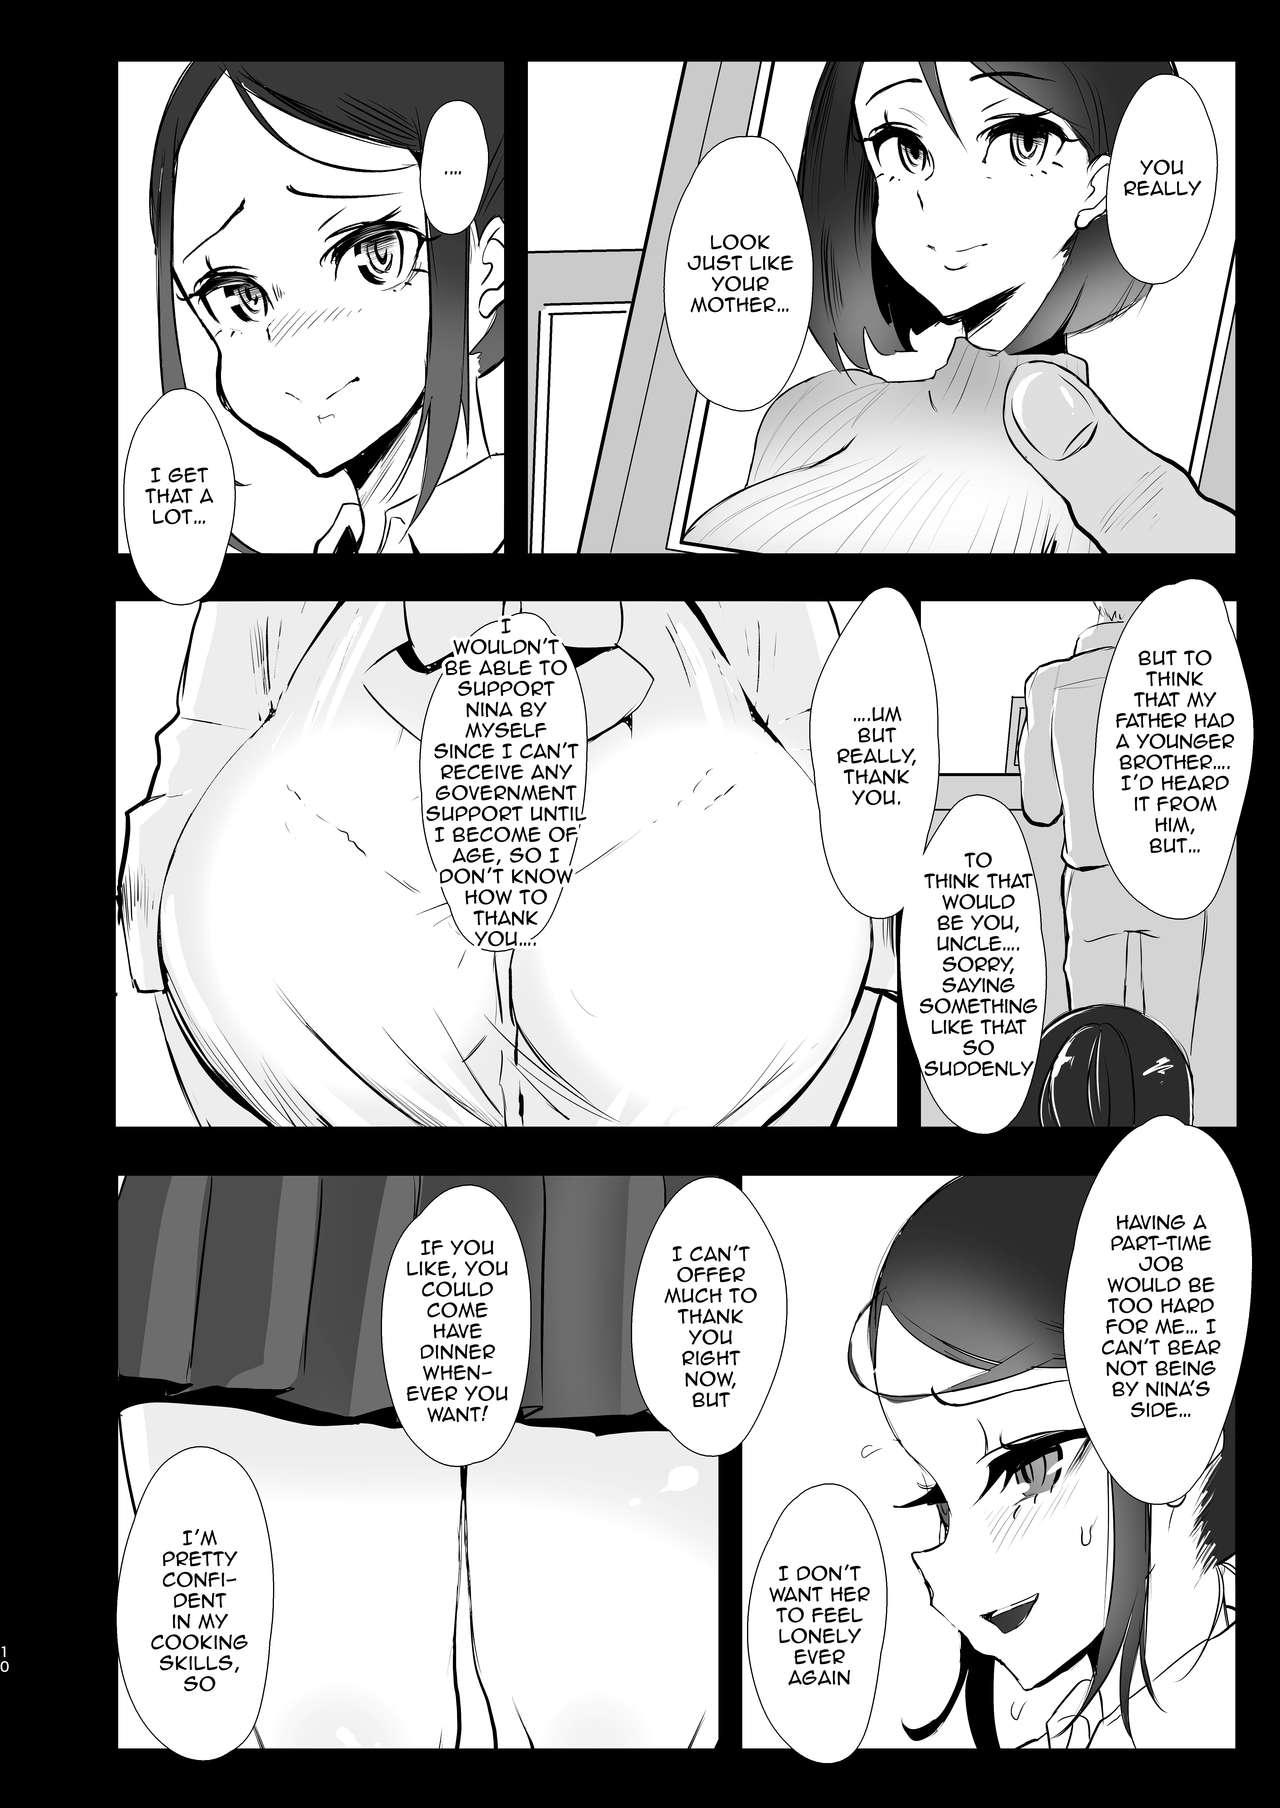 Arab Himawari no Kage | The Other Side of the Sunflower - Original  - Page 9